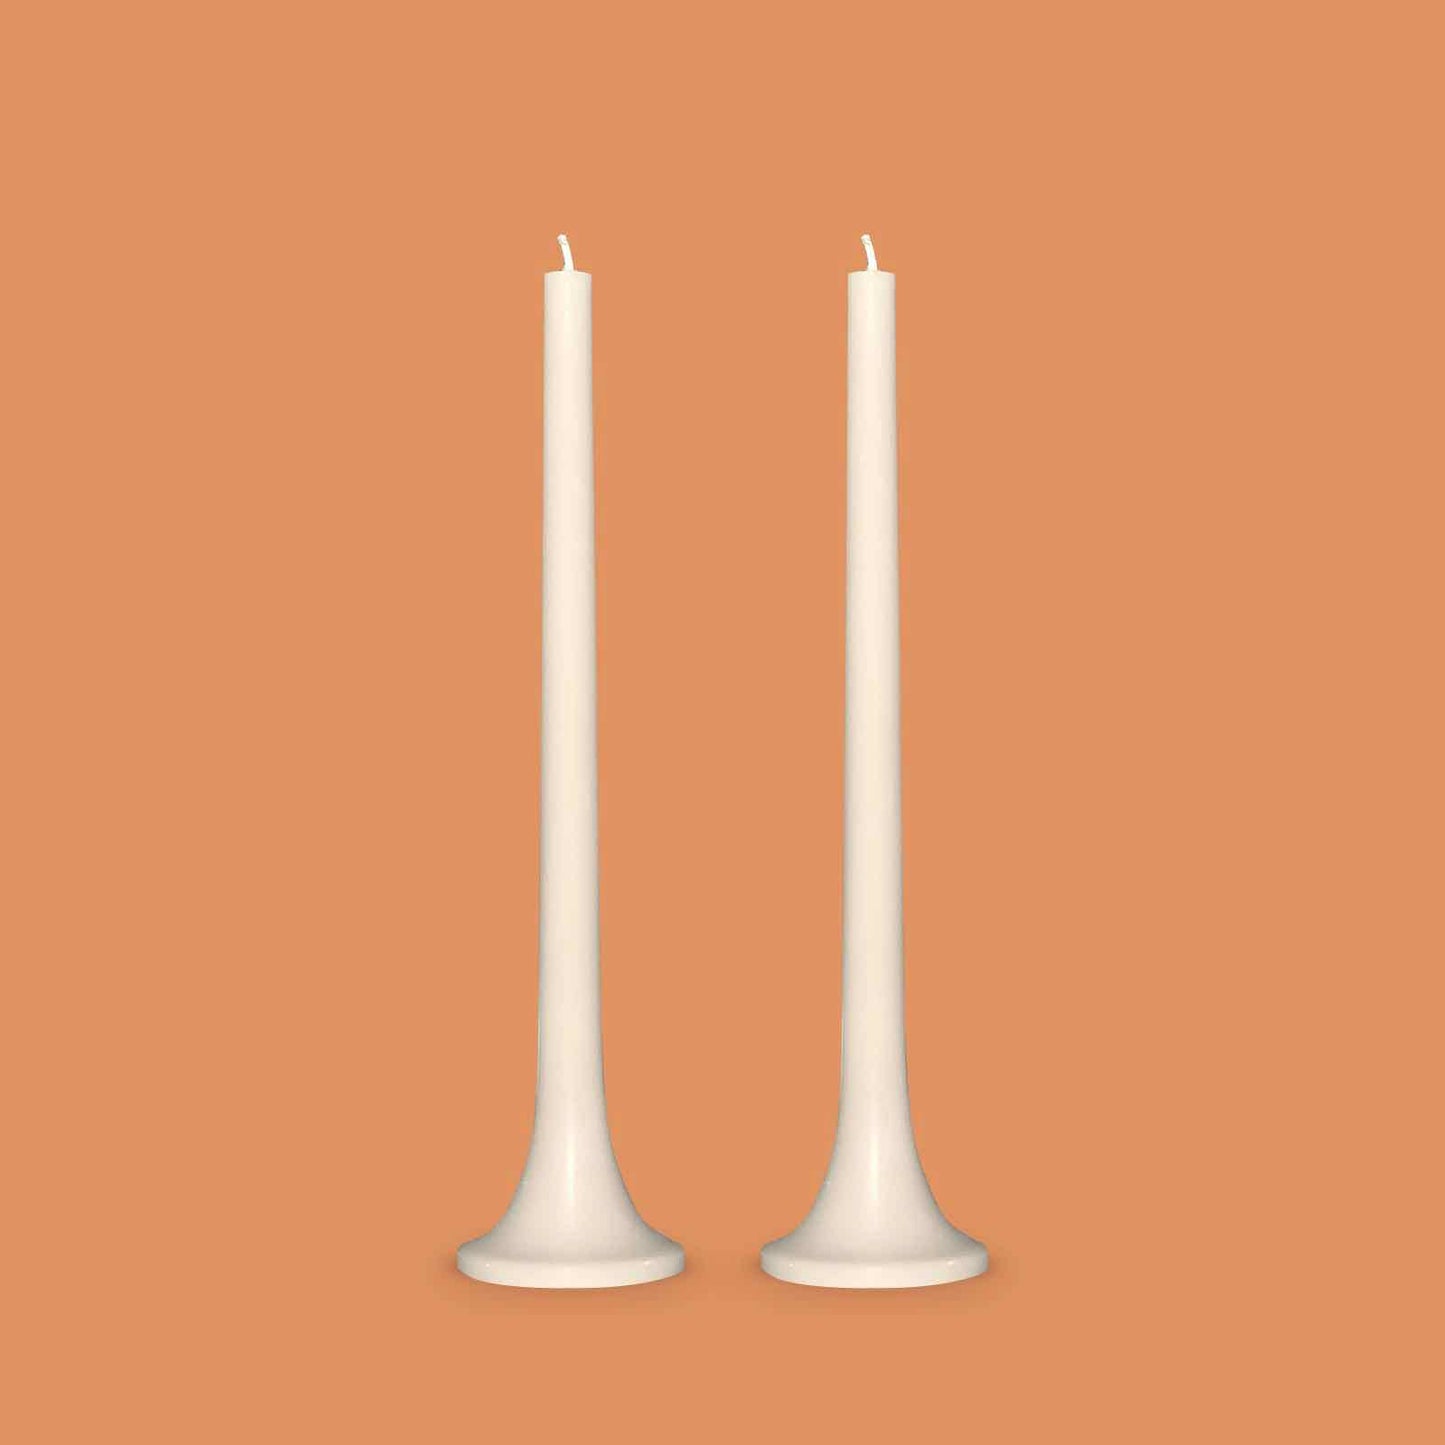 Neutral stone taper candles